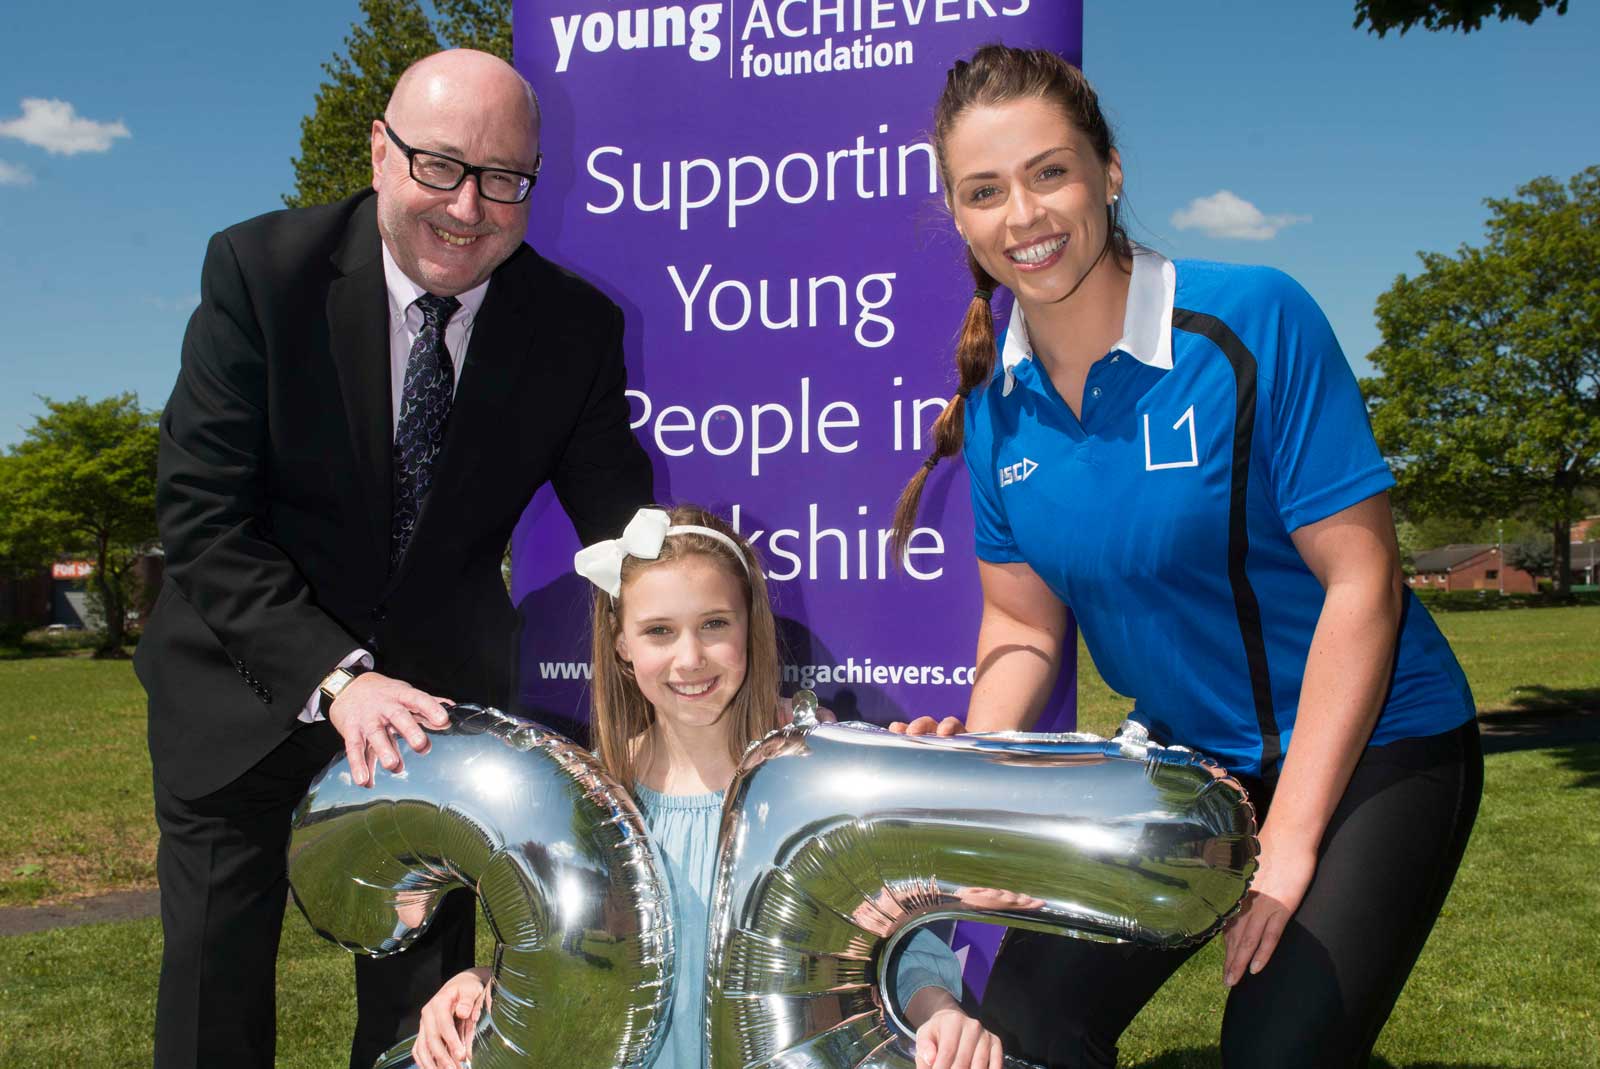 Awards Chairman Peter McCormick OBE launches the 25th Yorkshire Young Achievers Awards with 2016 Youngster of the Year Lucy Sherman, centre, and grant recipient Jessica Mayho